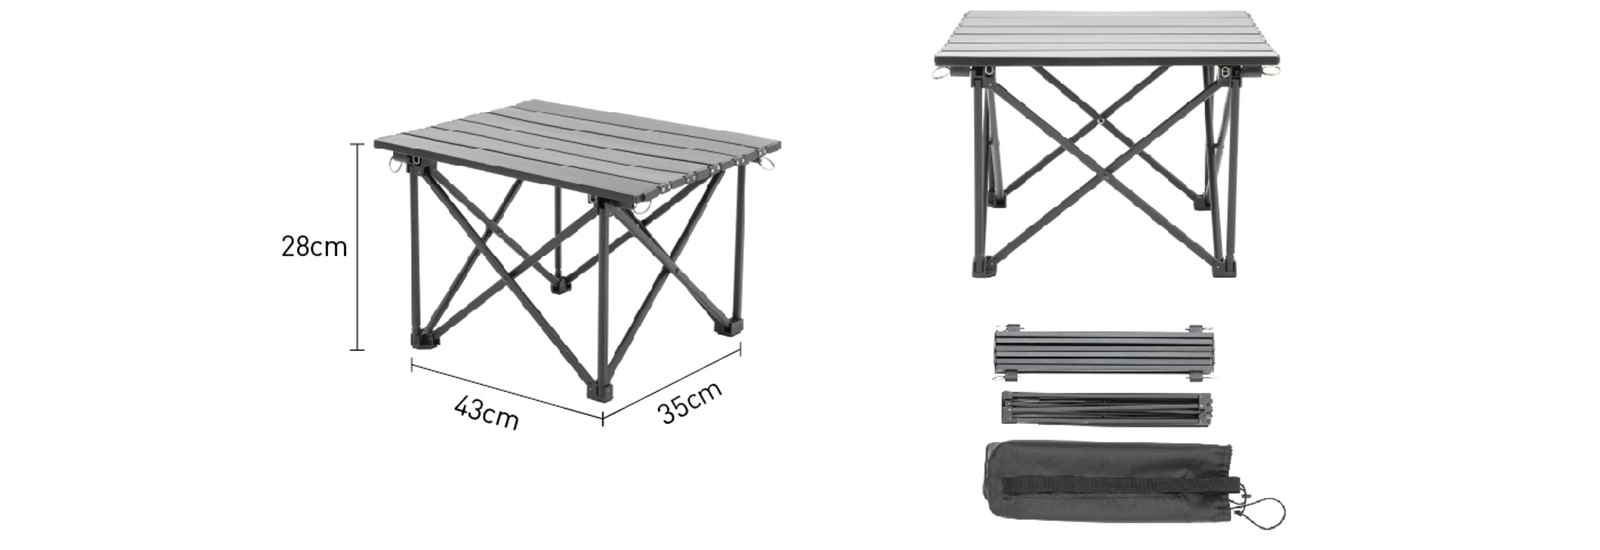 details of Aluminum Camping Folding Table/Roll Up design for Camping Picnic Use